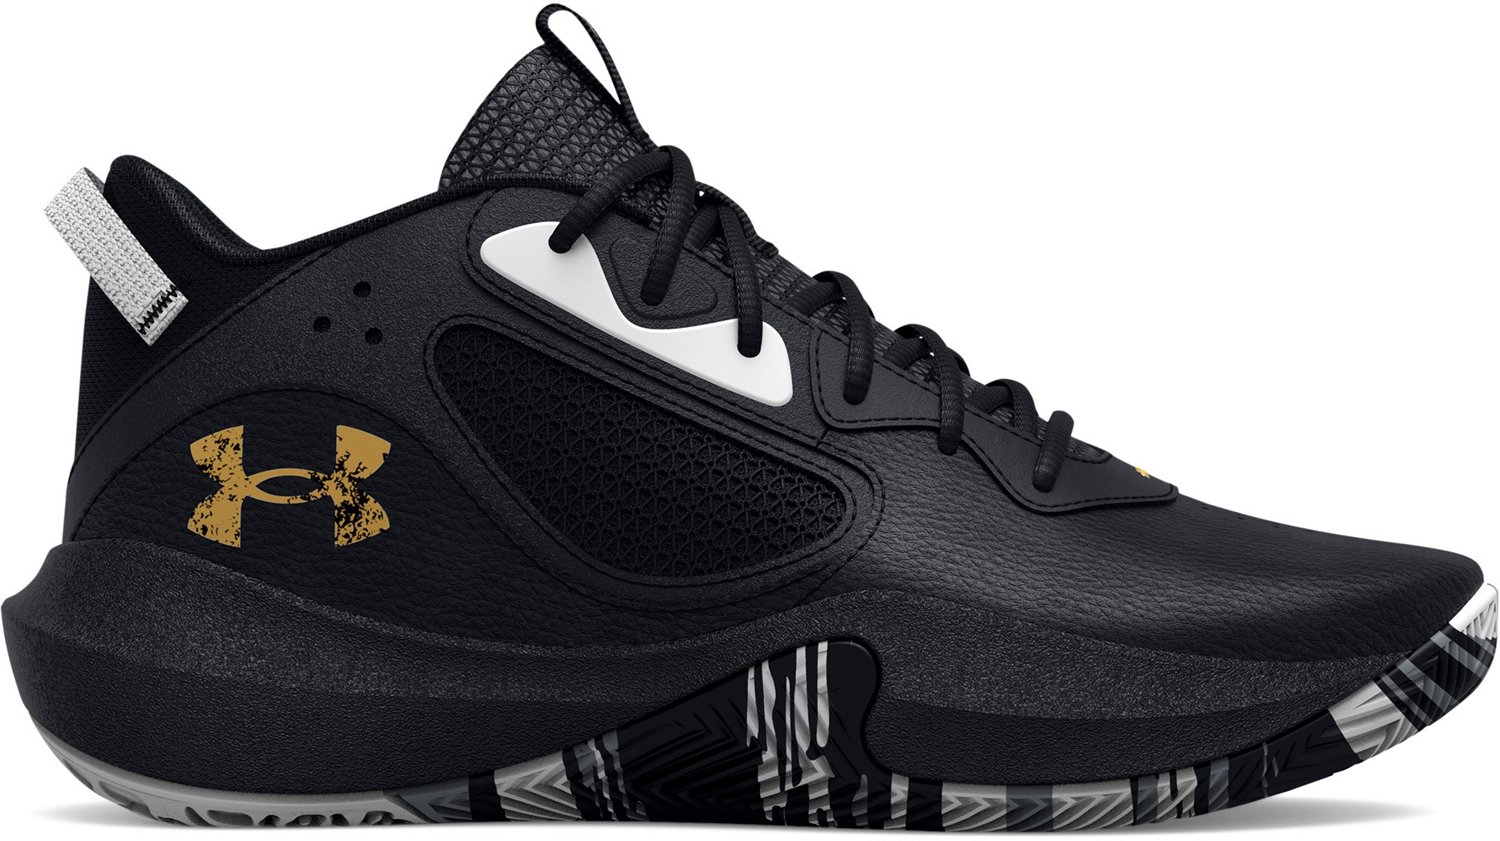 Under Armour Youth Lockdown 6 Basketball Shoes